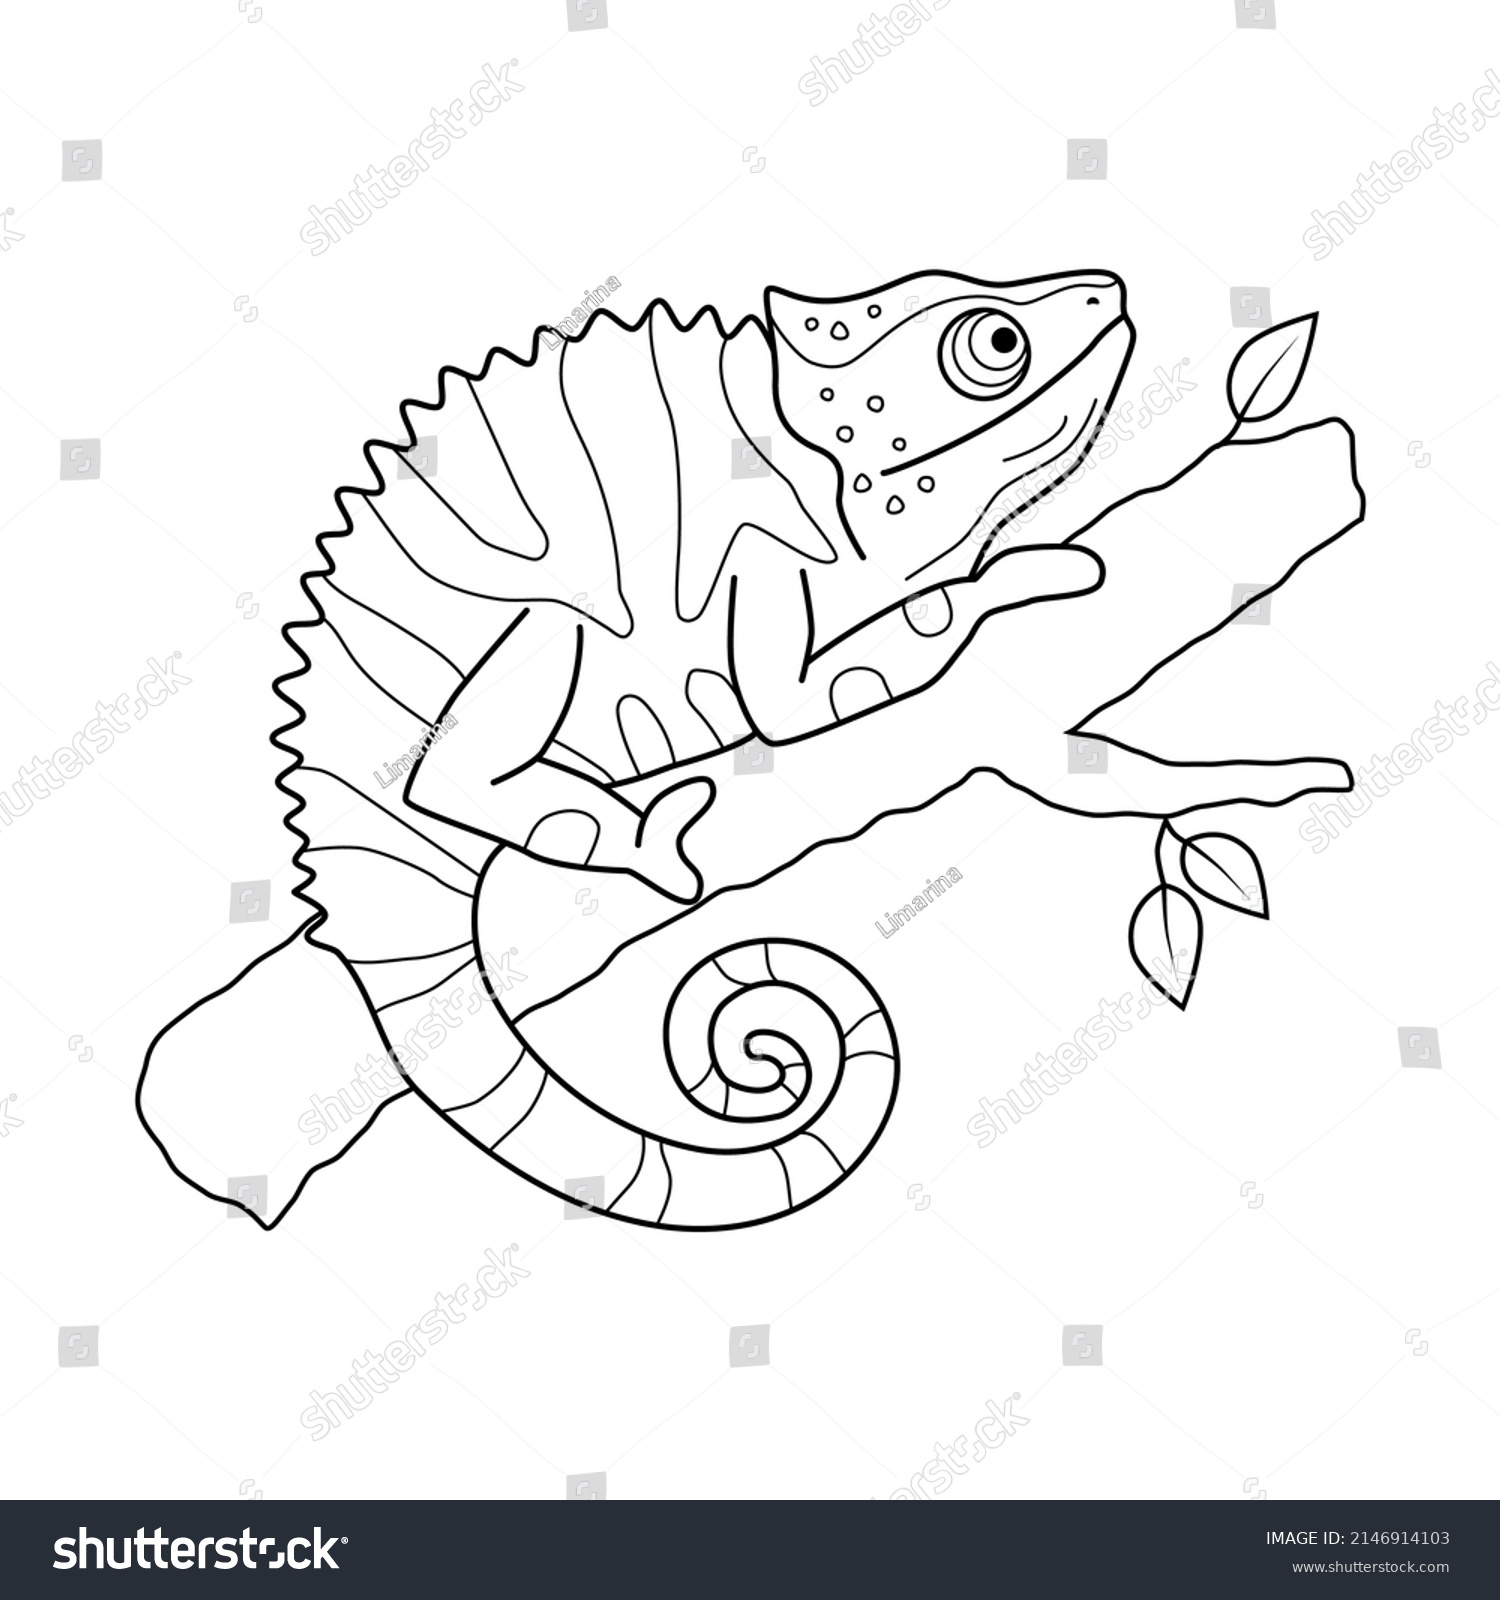 SVG of Chameleon on a tree branch black and white contour hand drawn illustration on white background svg